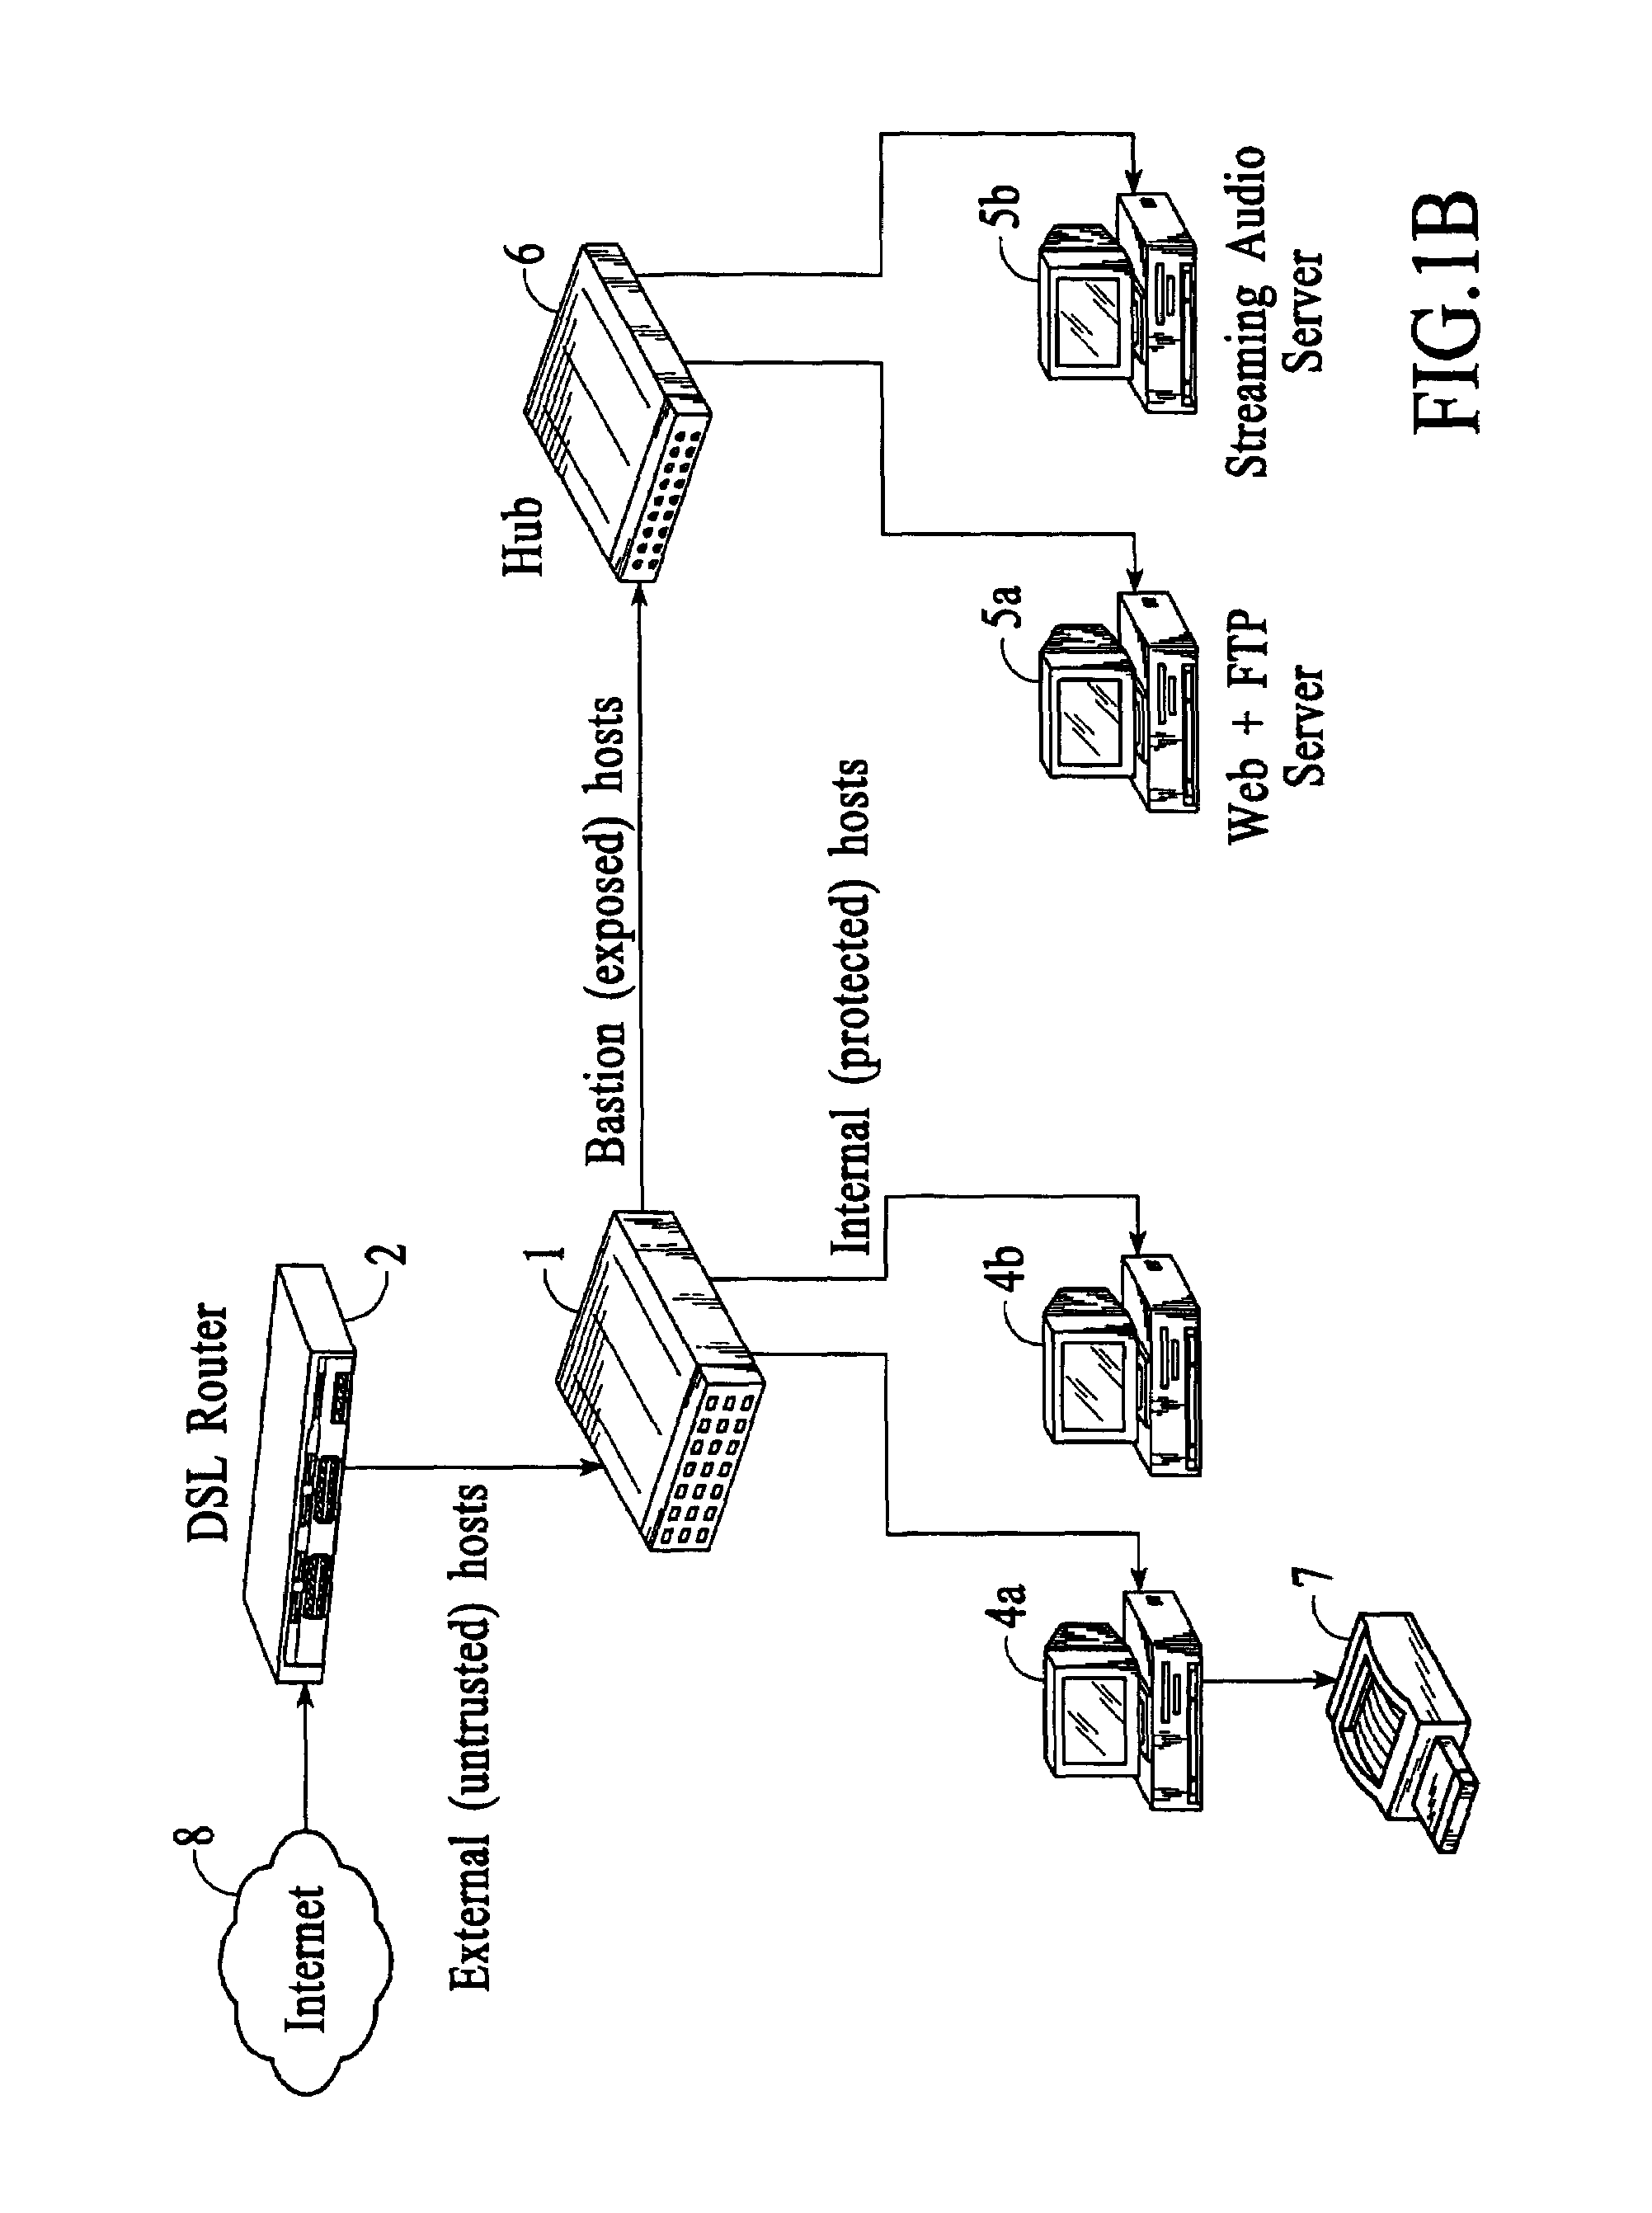 PLD-based packet filtering methods with PLD configuration data update of filtering rules